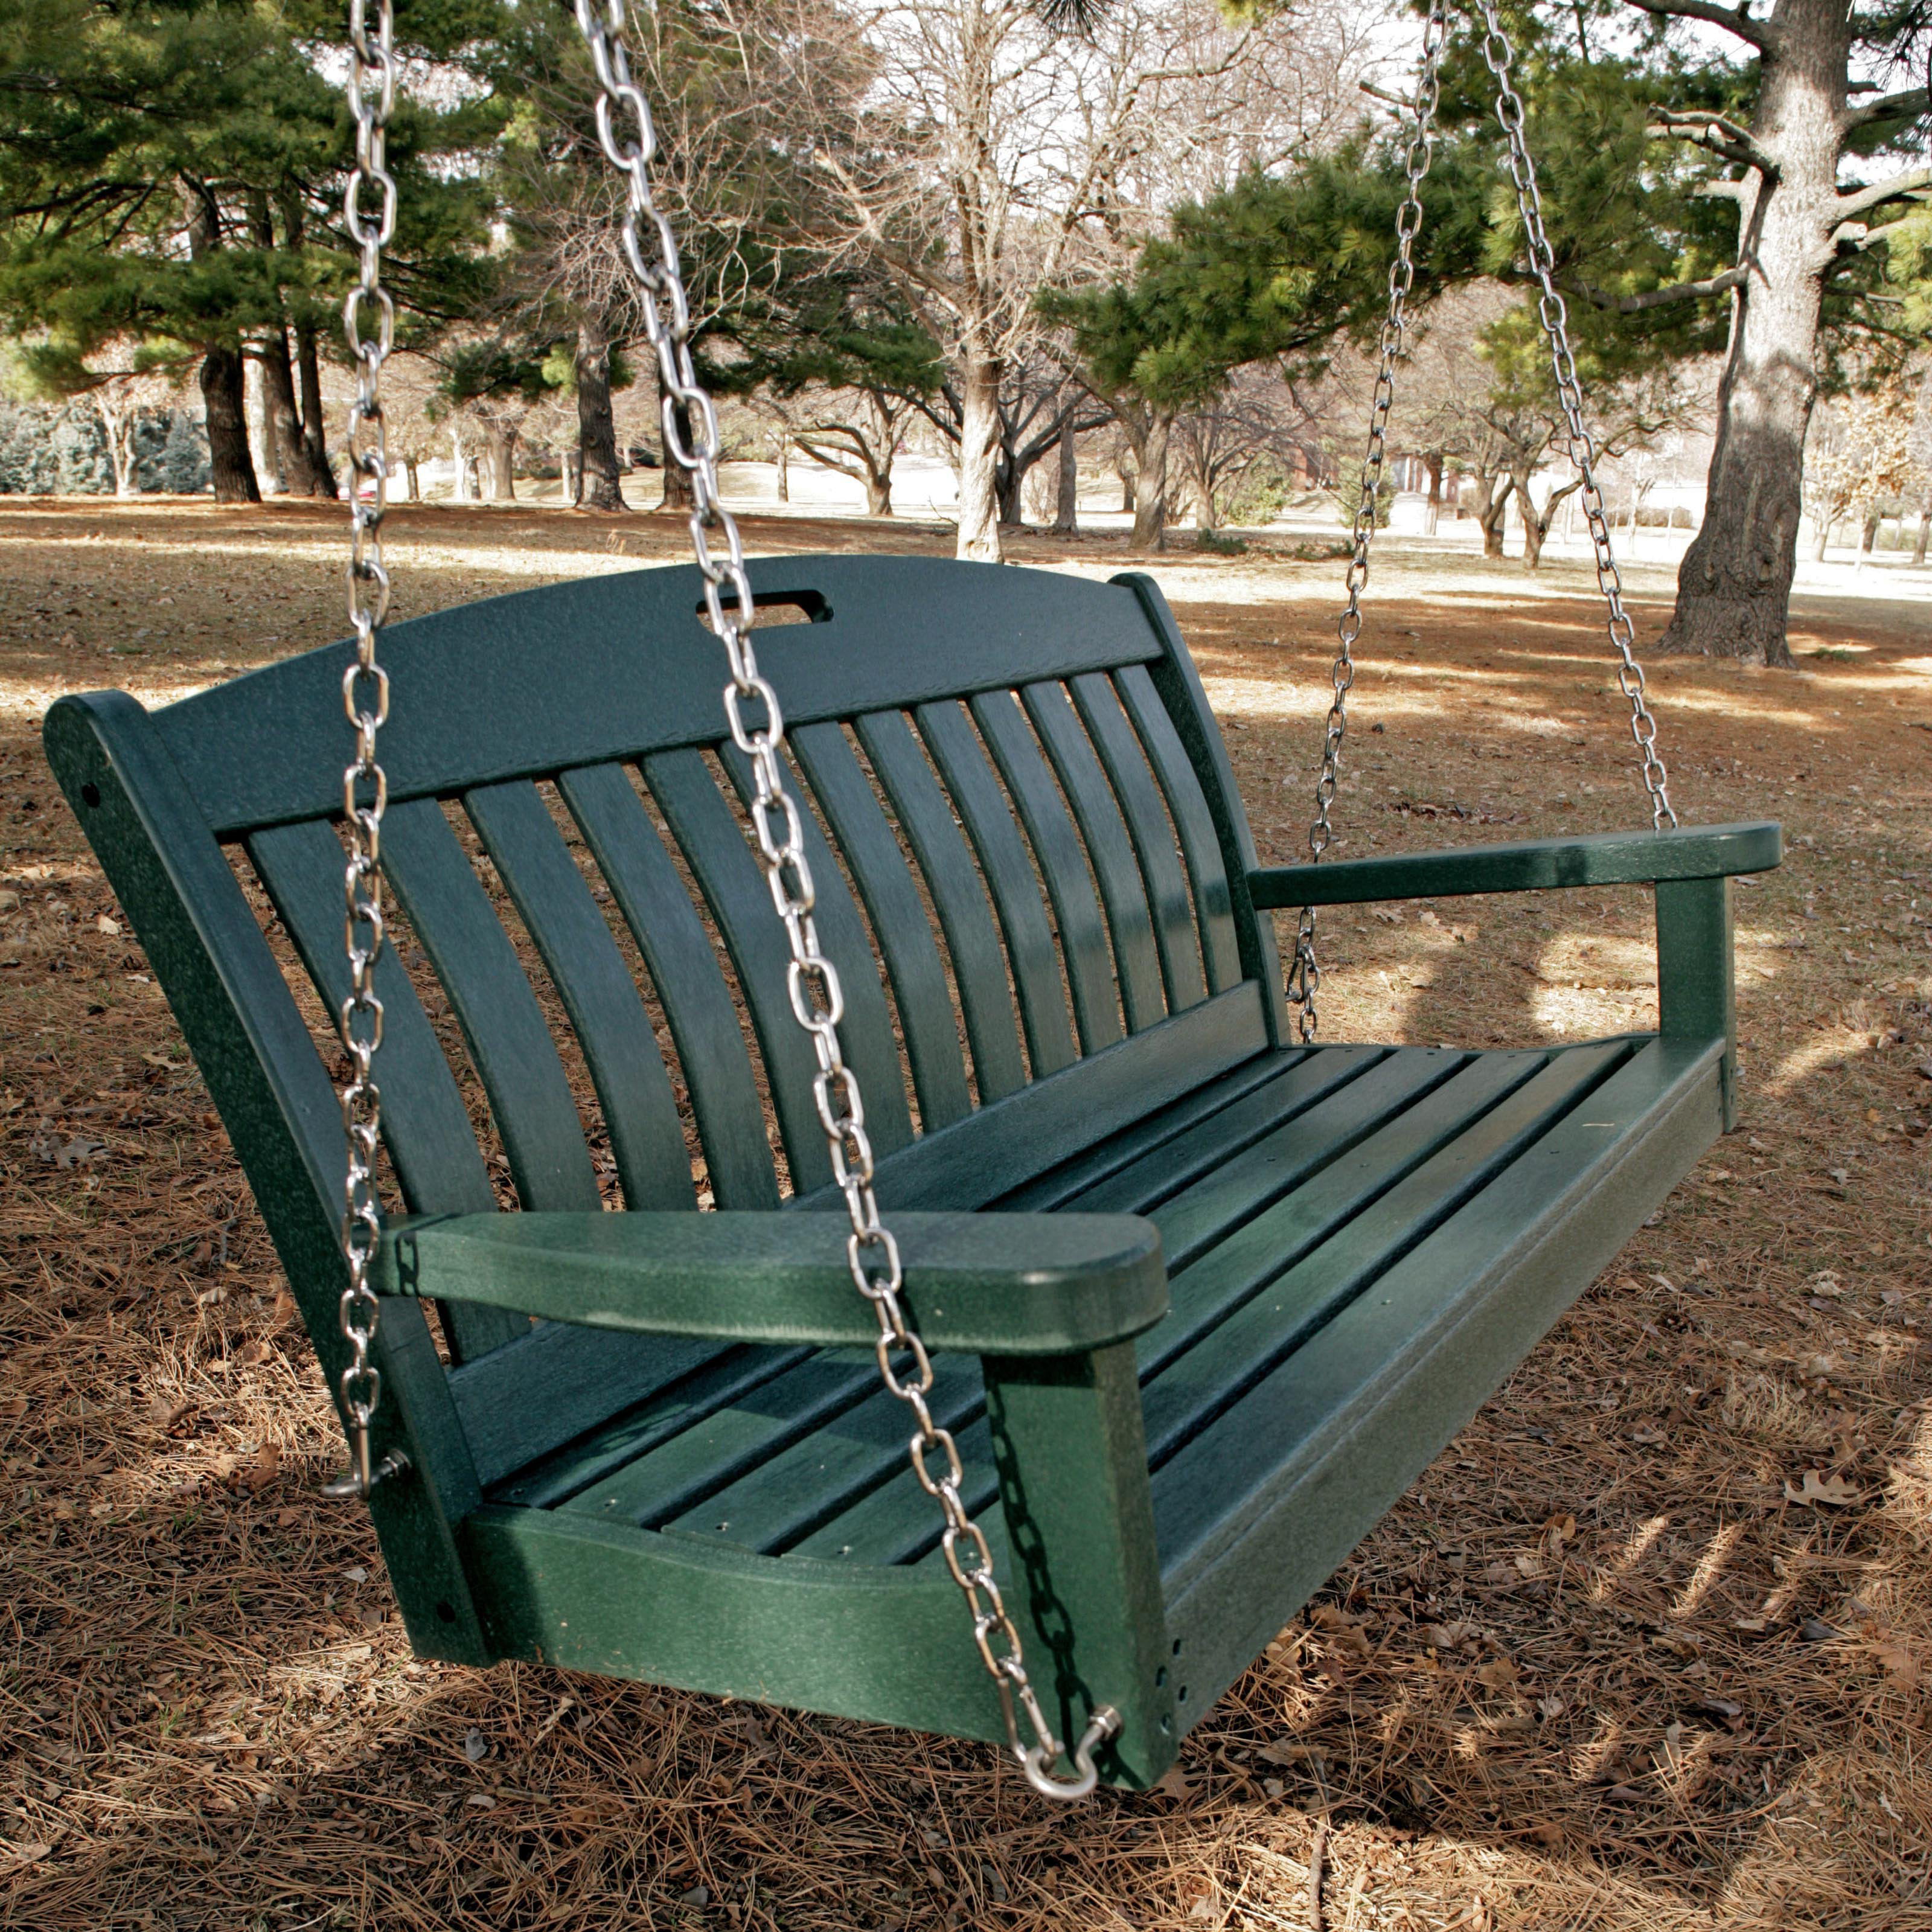 Comfortable Outdoor Swings For Relaxation